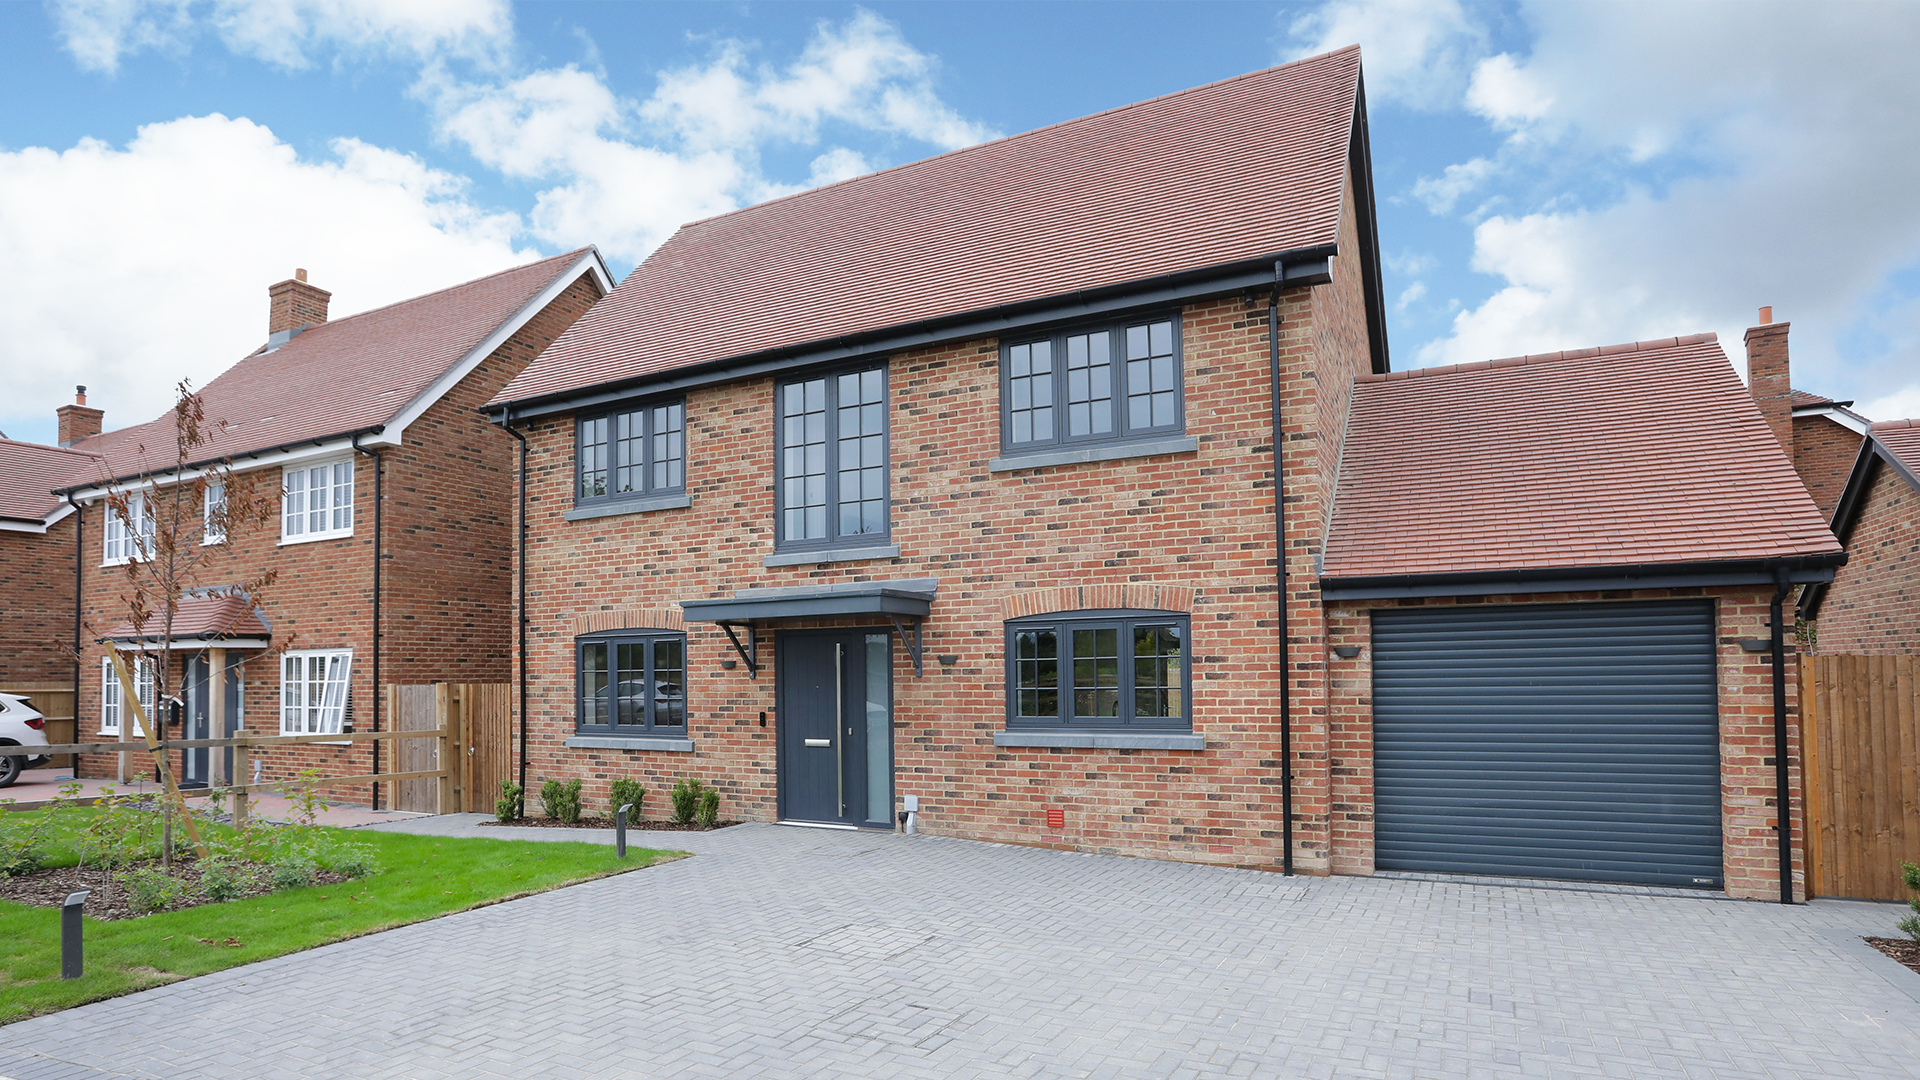 Detached house with red bricks, grey windows and garage door and block pave drive.